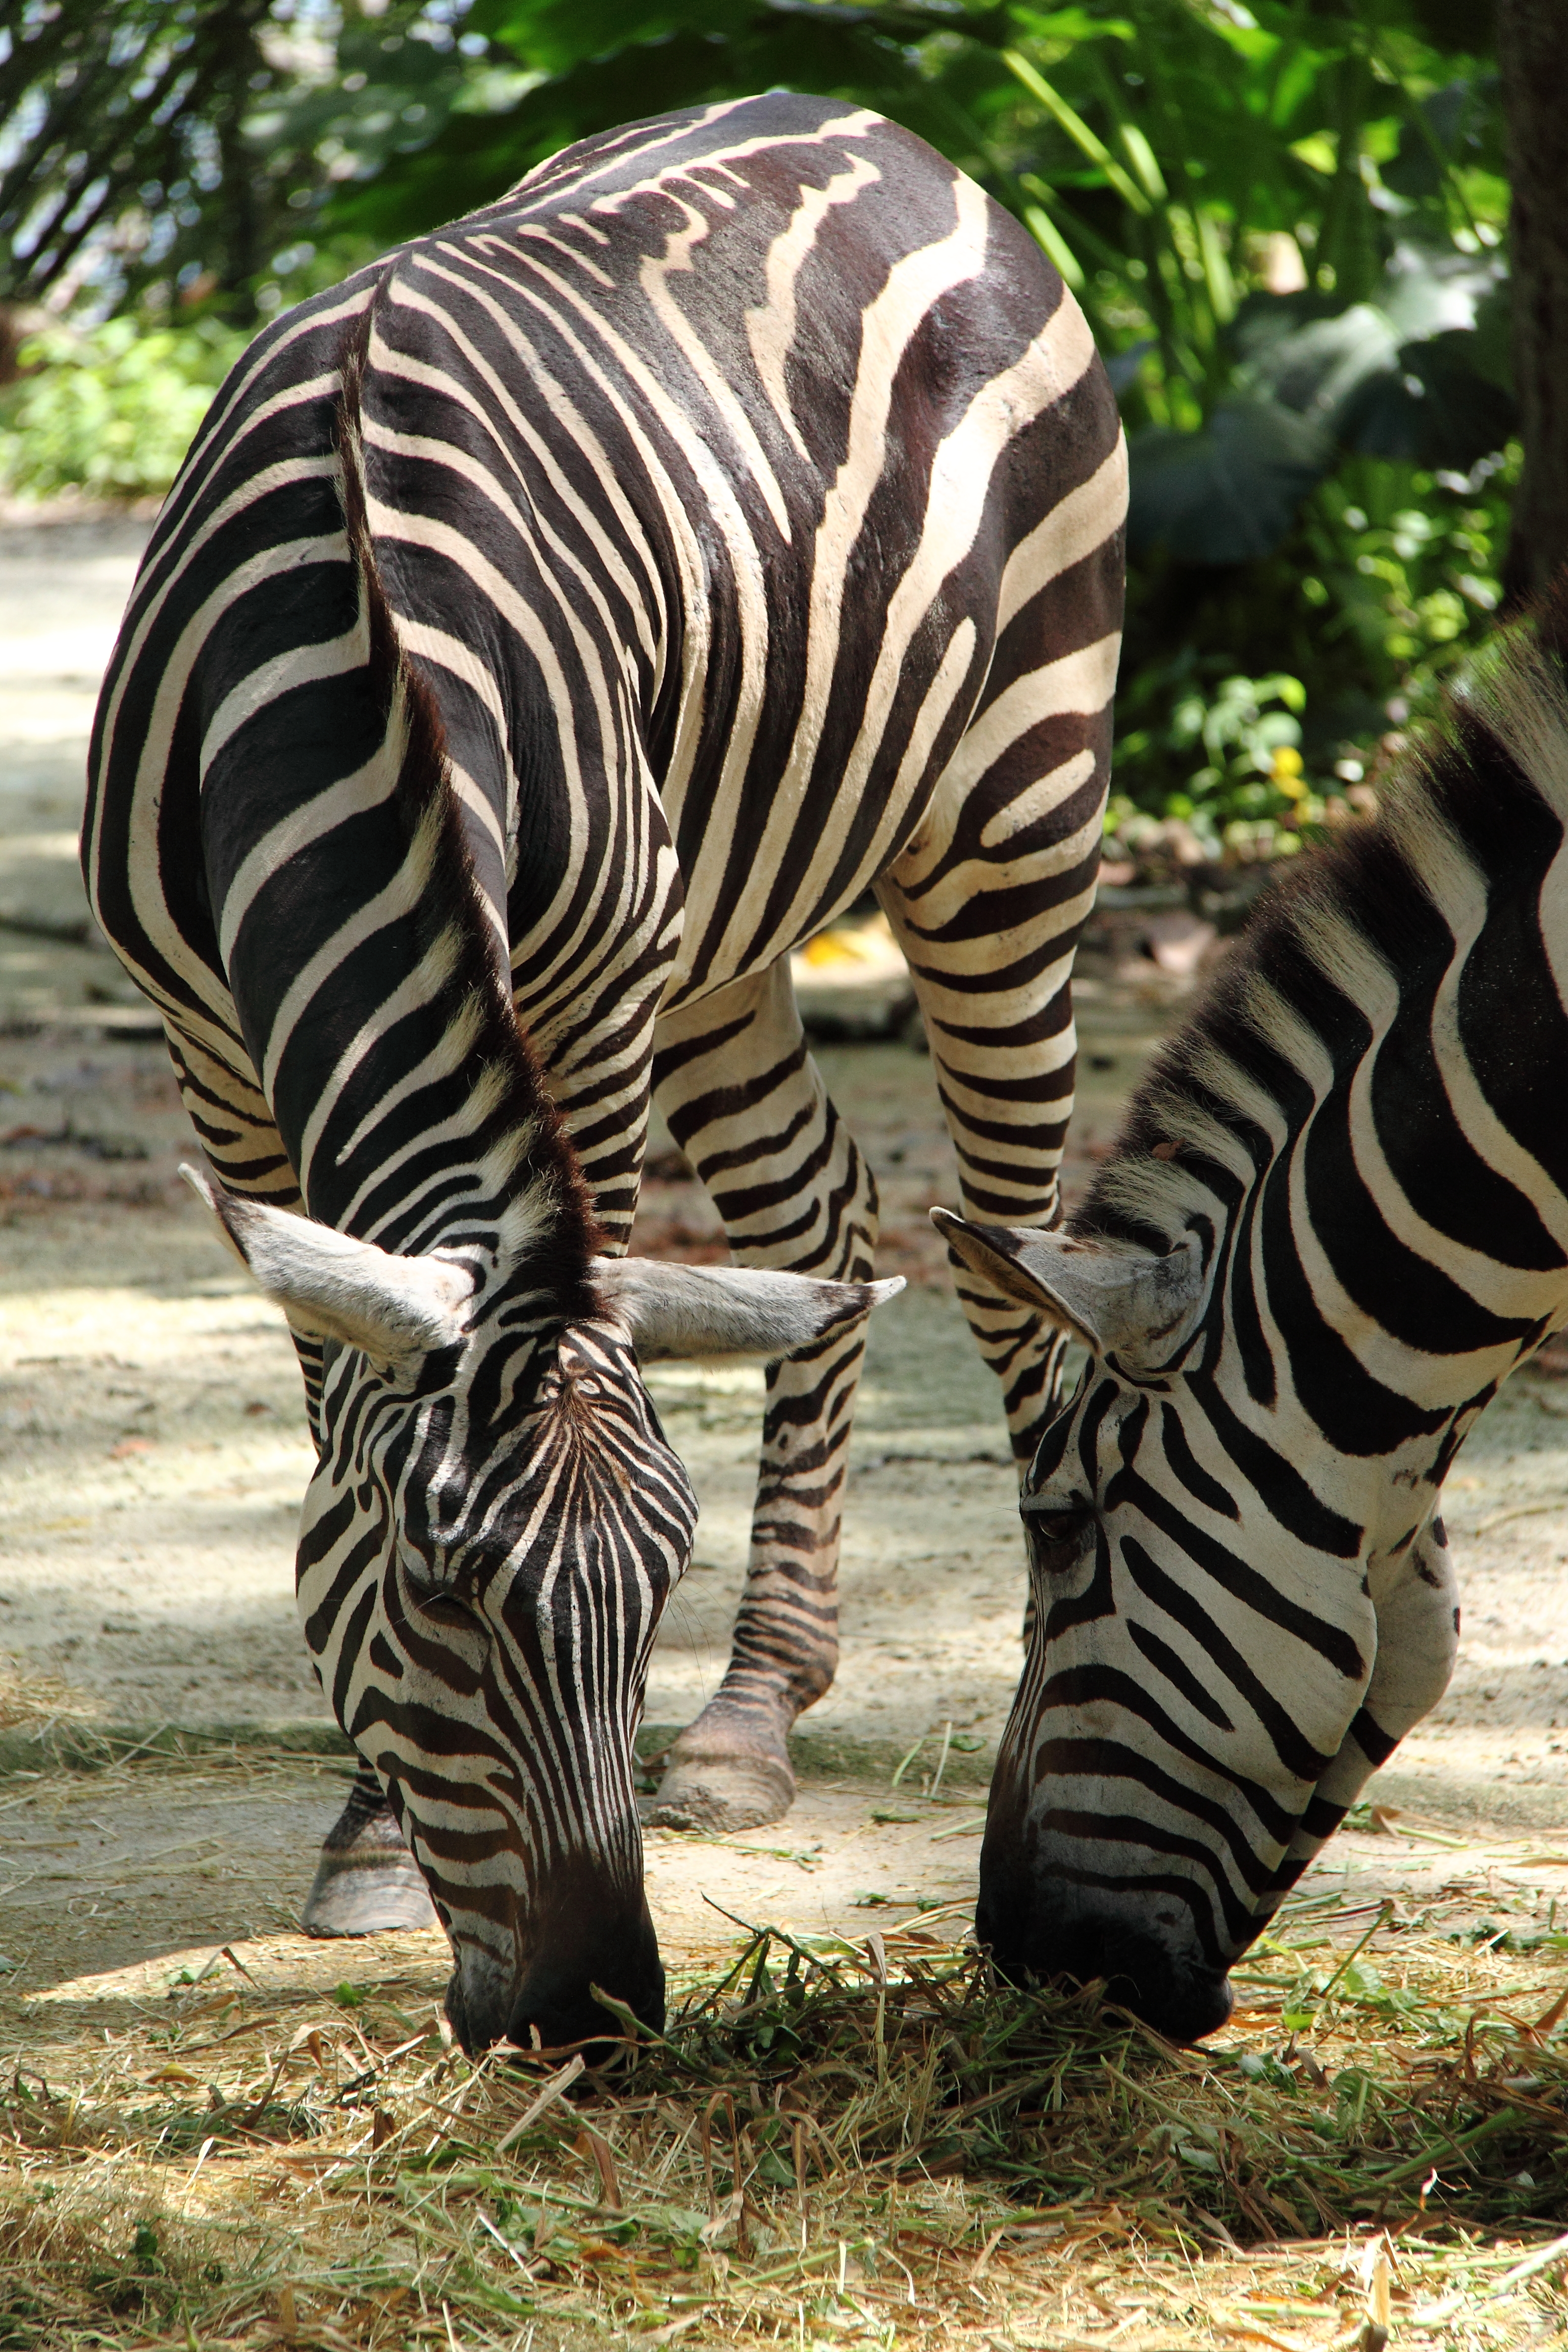 Excursion to the Zoo | Soulvoyager's Blog